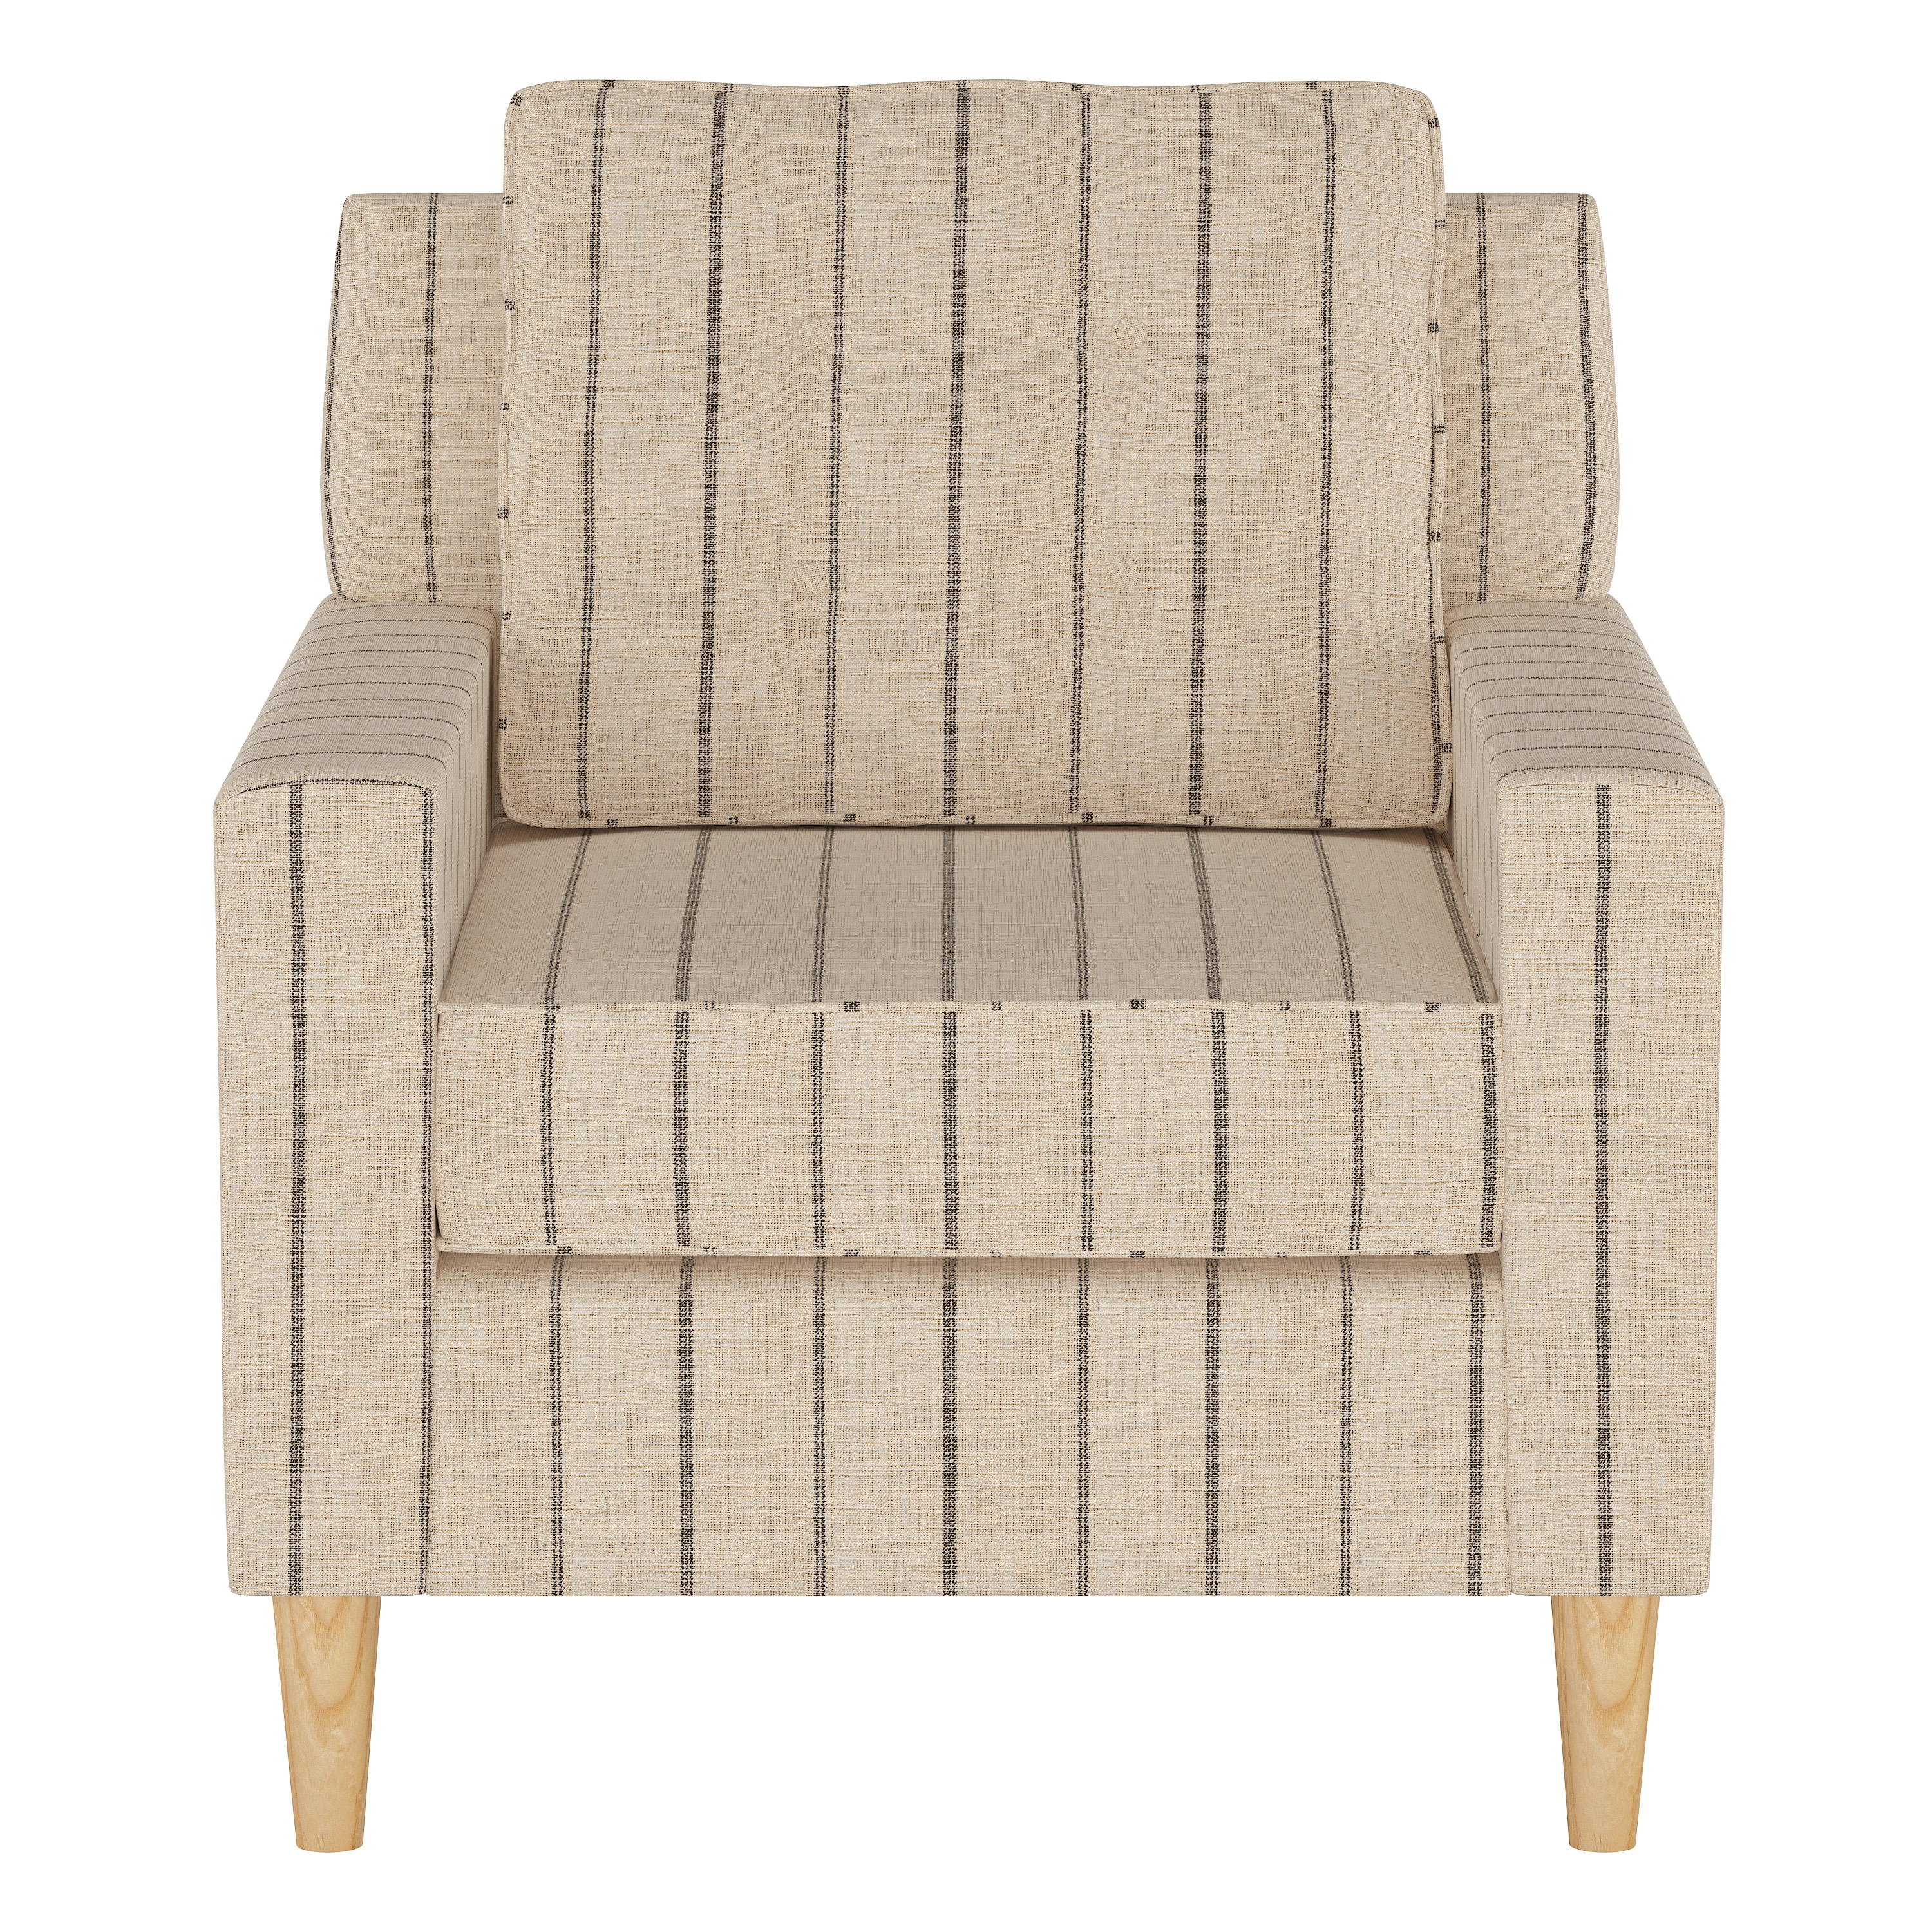 Parkview Chair - Image 1